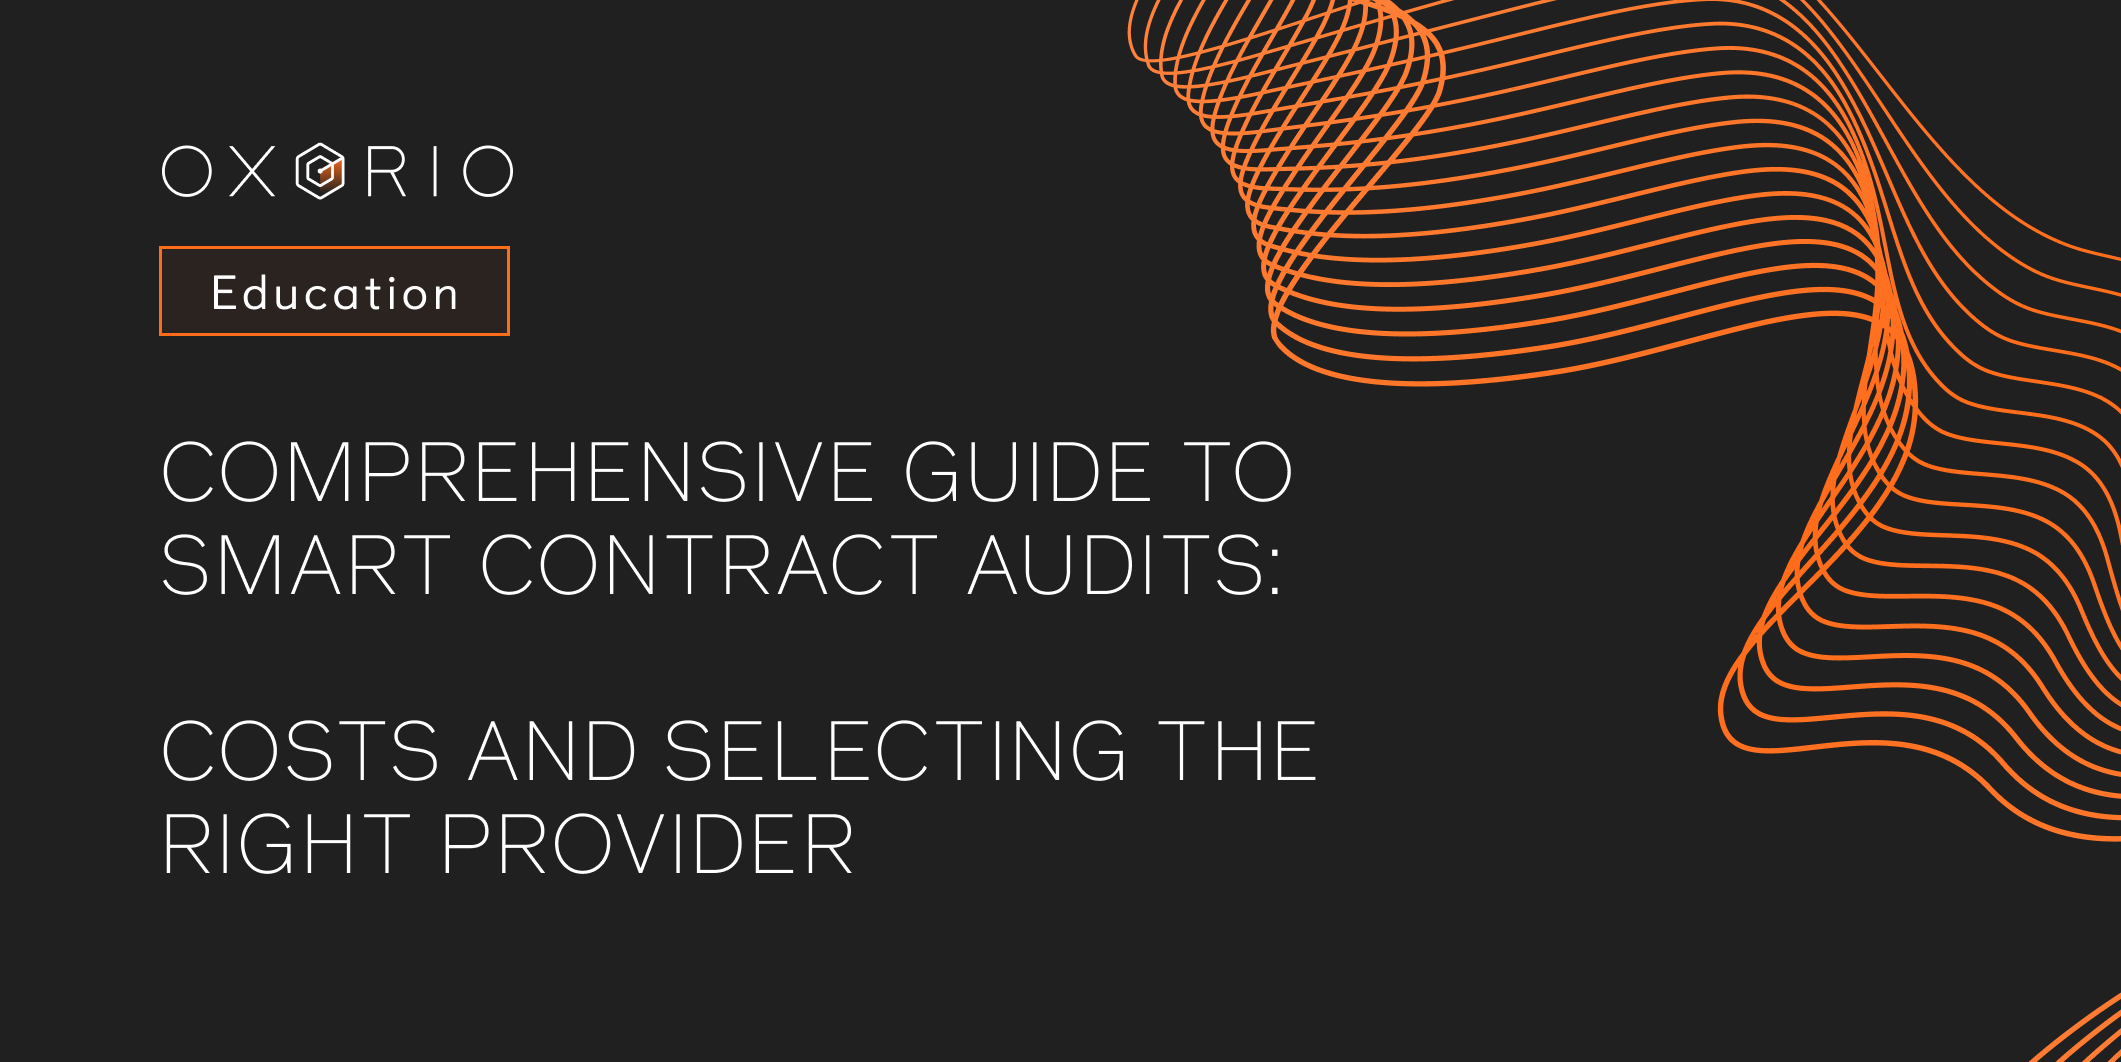 Explore the importance and costs of smart contract audits in blockchain technology, and learn how to choose the right provider.